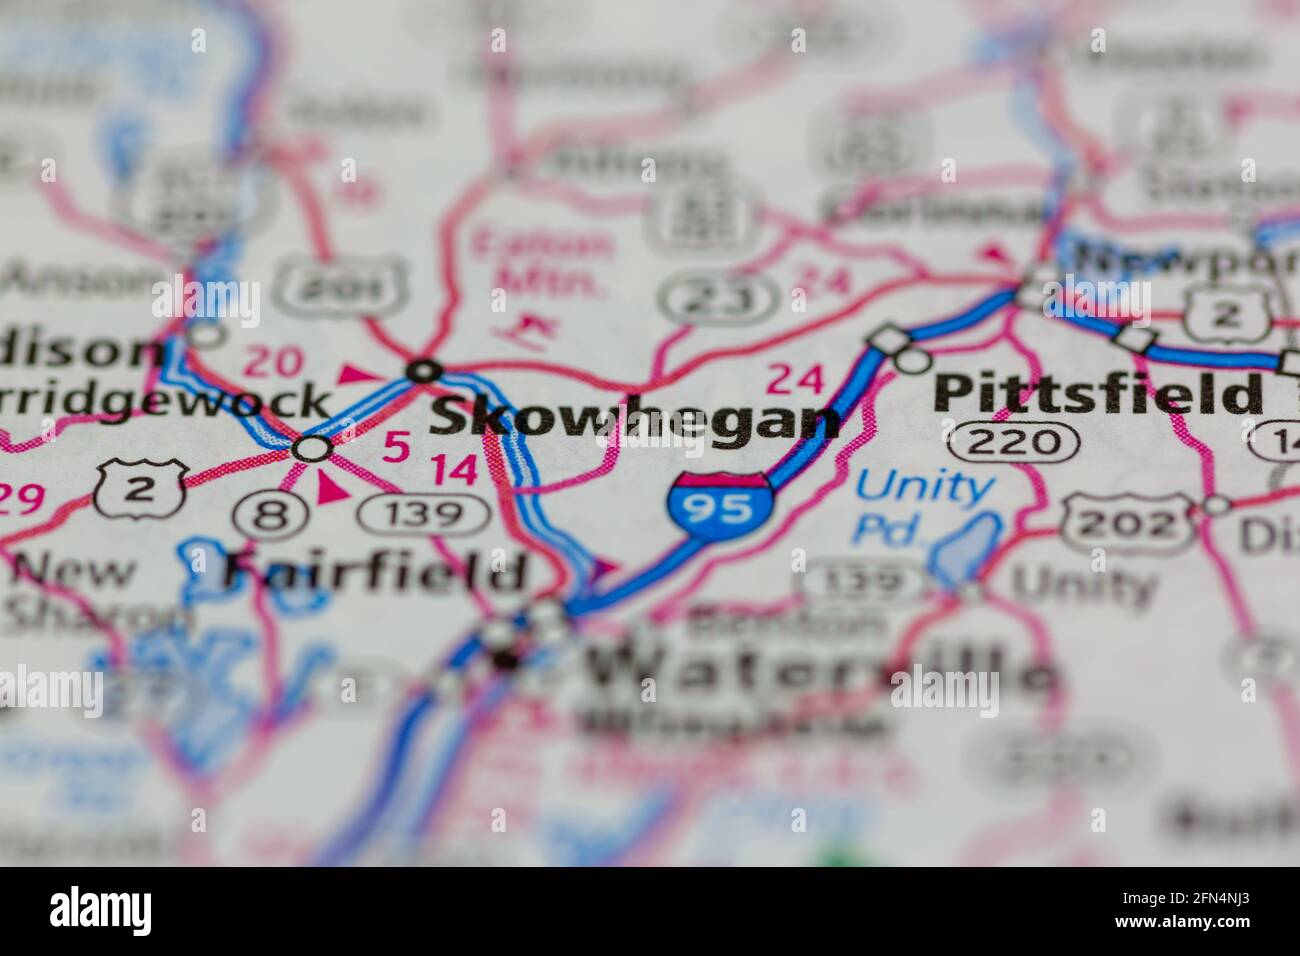 Skowhegan Maine USA shown on a Geography map or road map Stock Photo